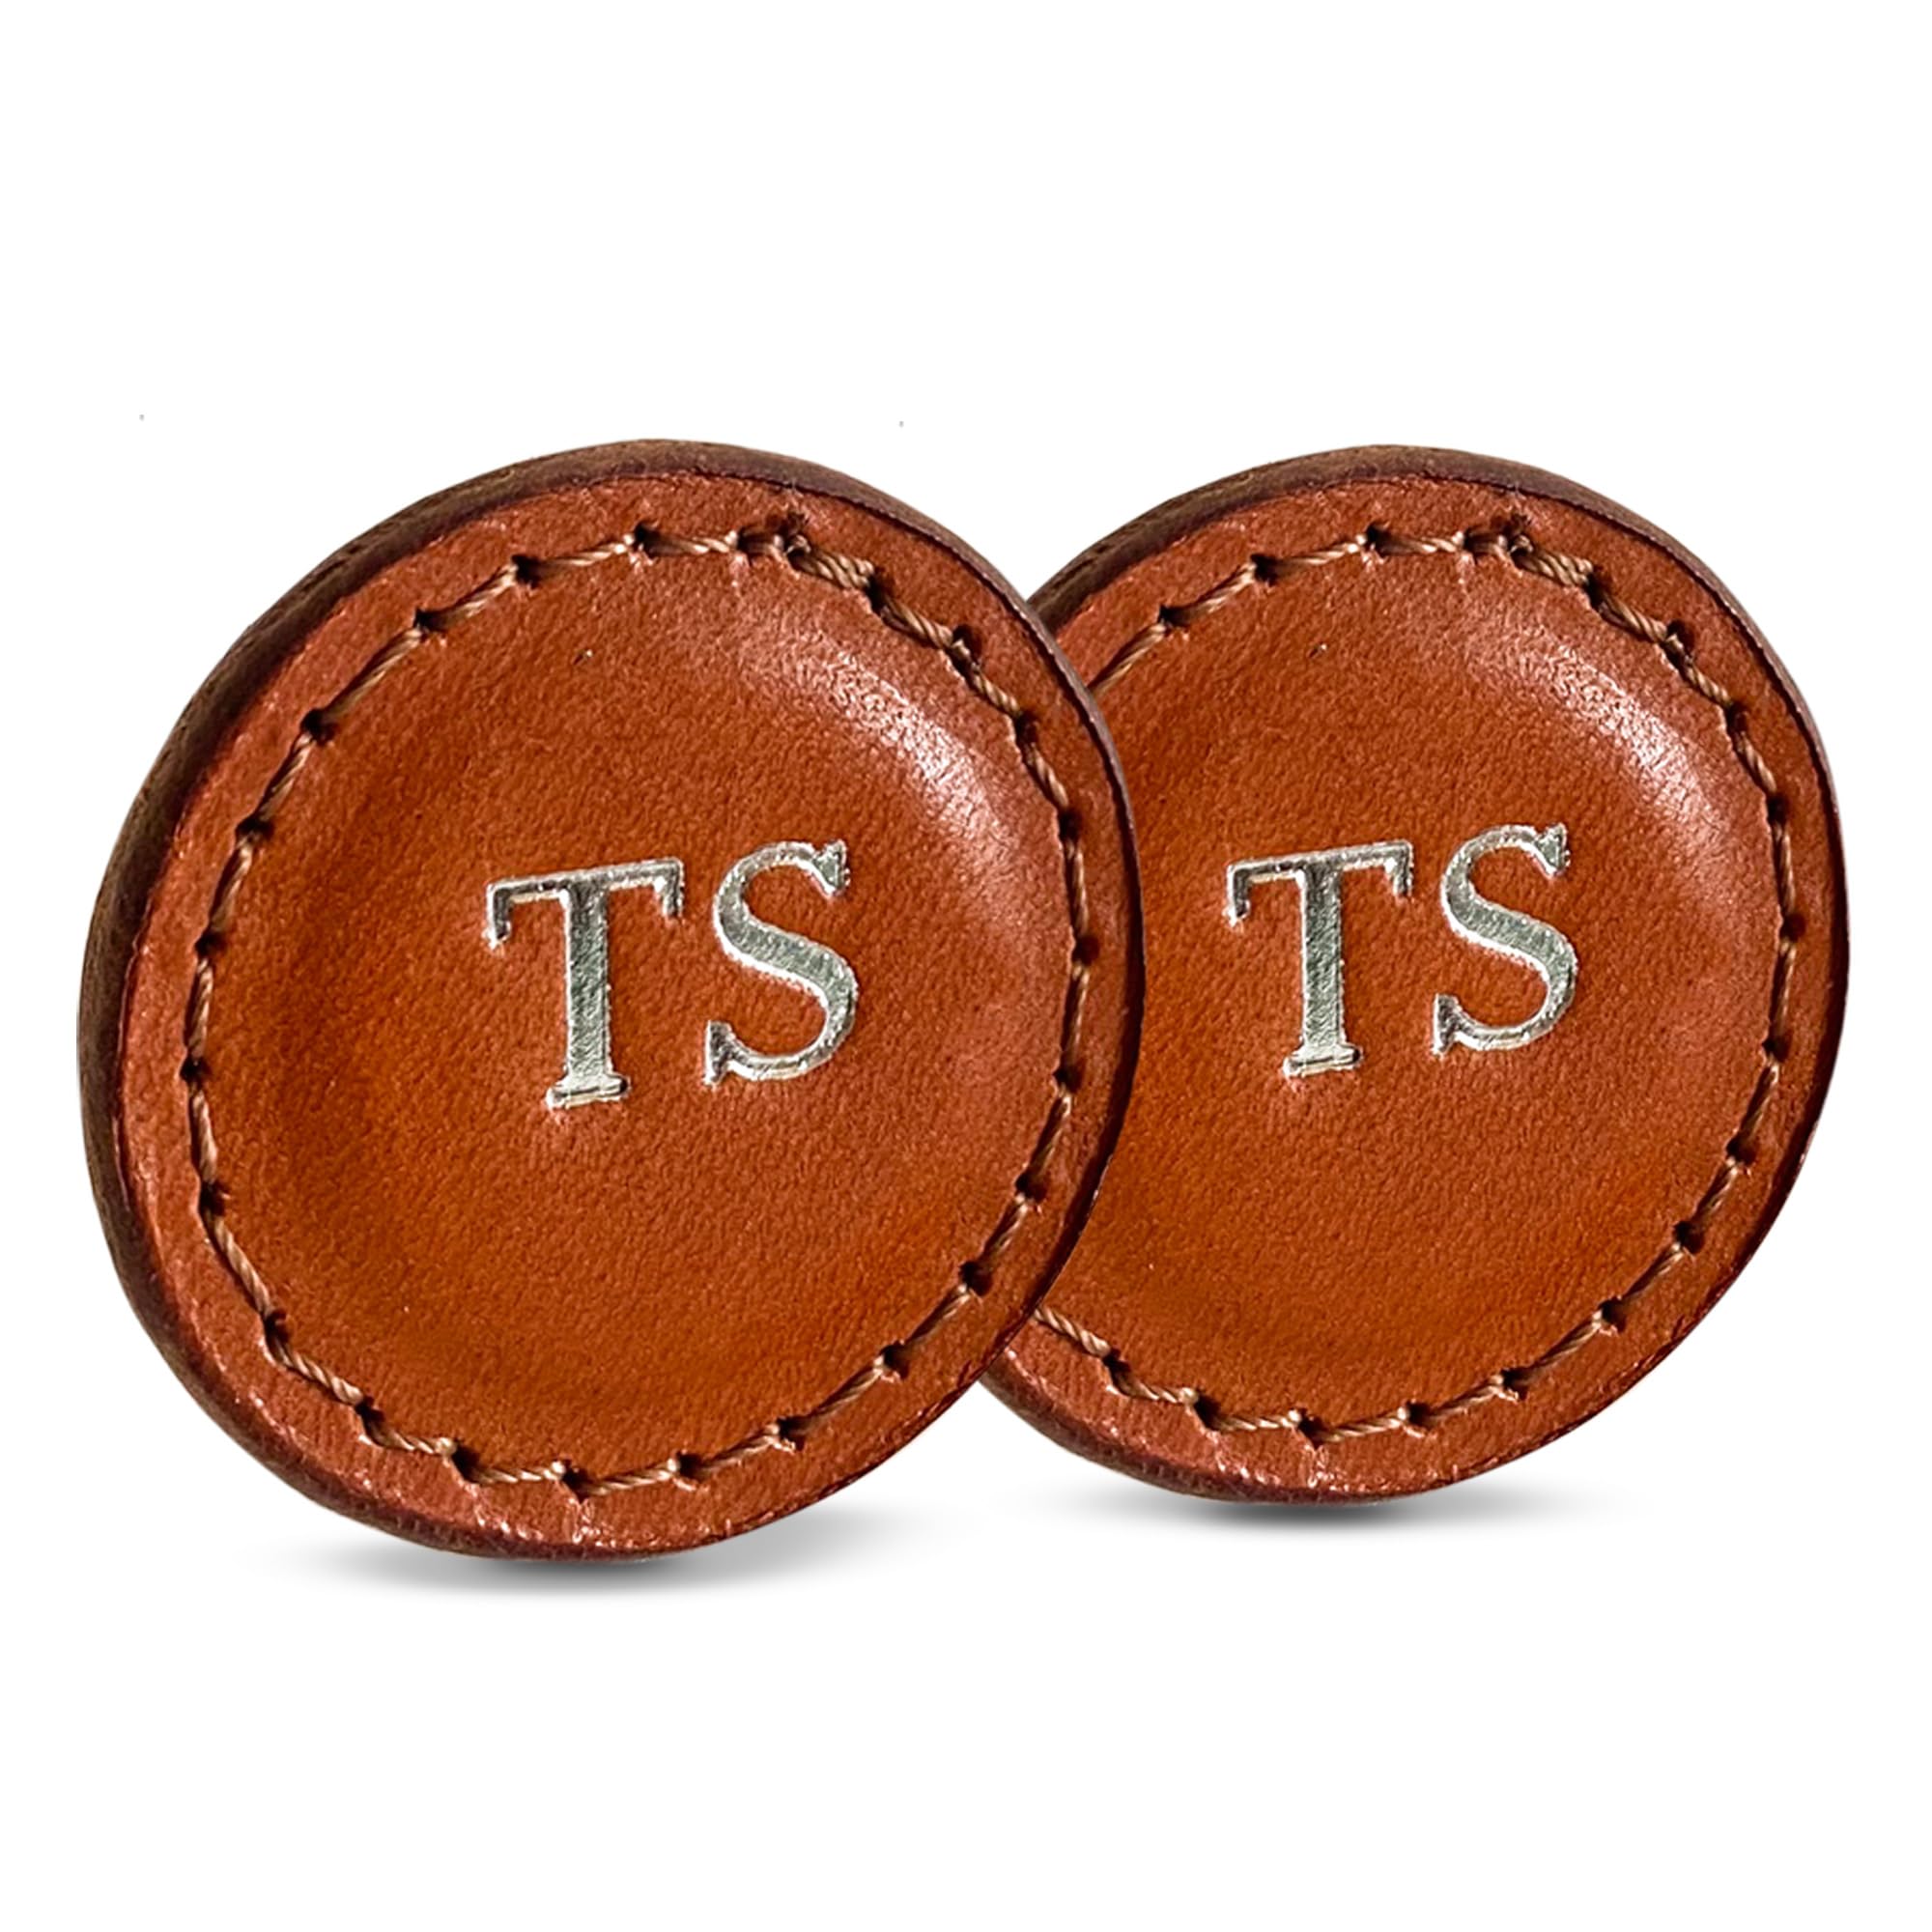 Personalized Golf Ball Markers (Tan, Set of 2) - Golf Gifts for Men - Monogrammed Initial Custom Golf Markers w/Full Grain Genuine Leather - Father’s Day Gift for Golf Lover - Cool Golf Accessories